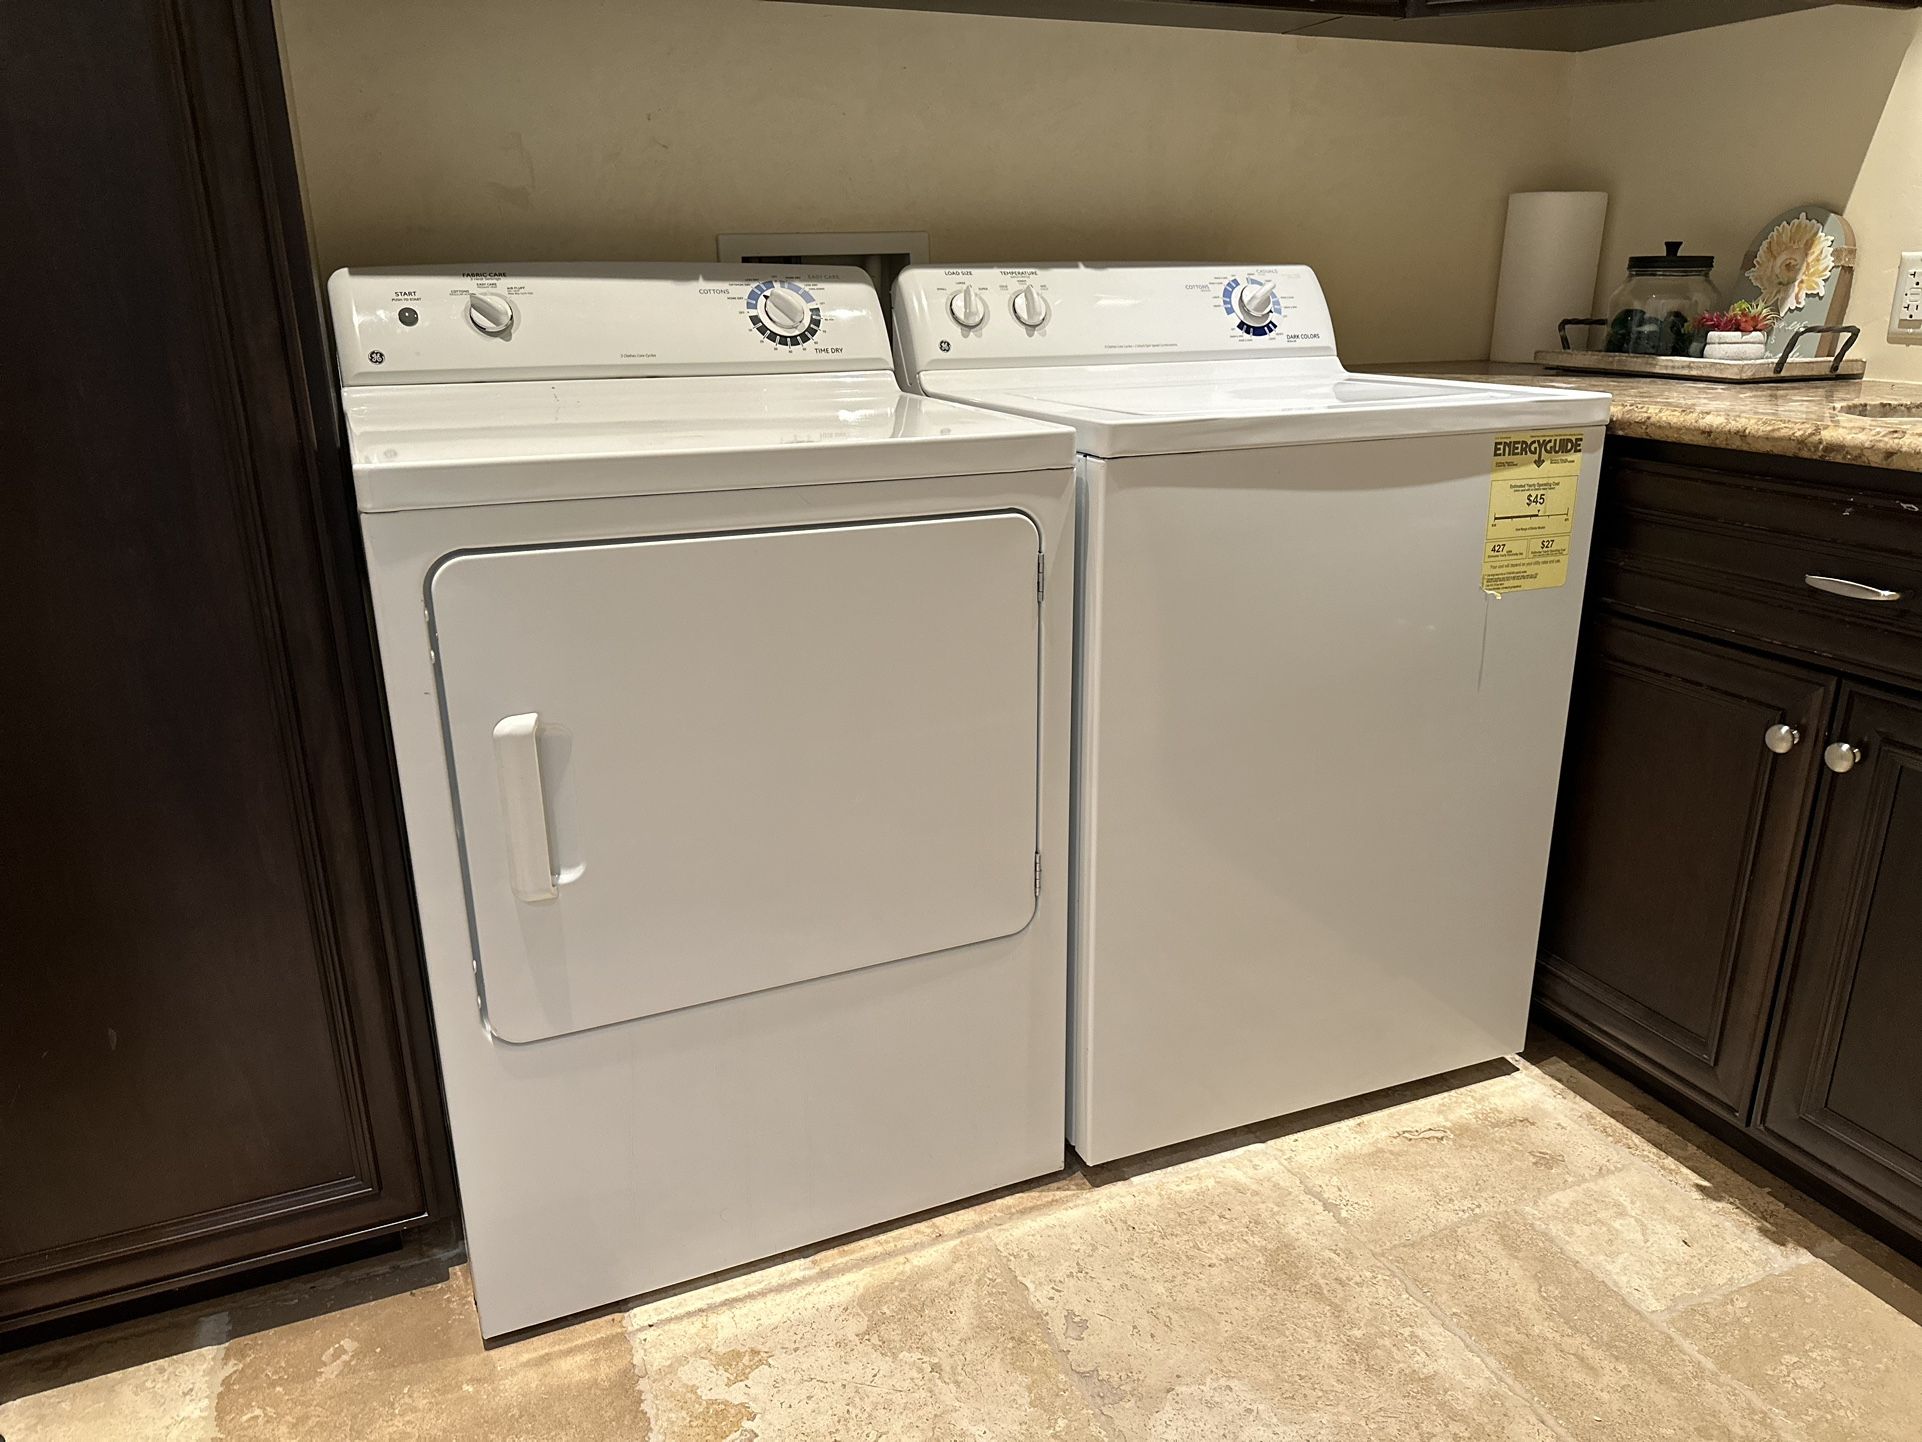 GE Washer & Electric Dryer Set For SALE!